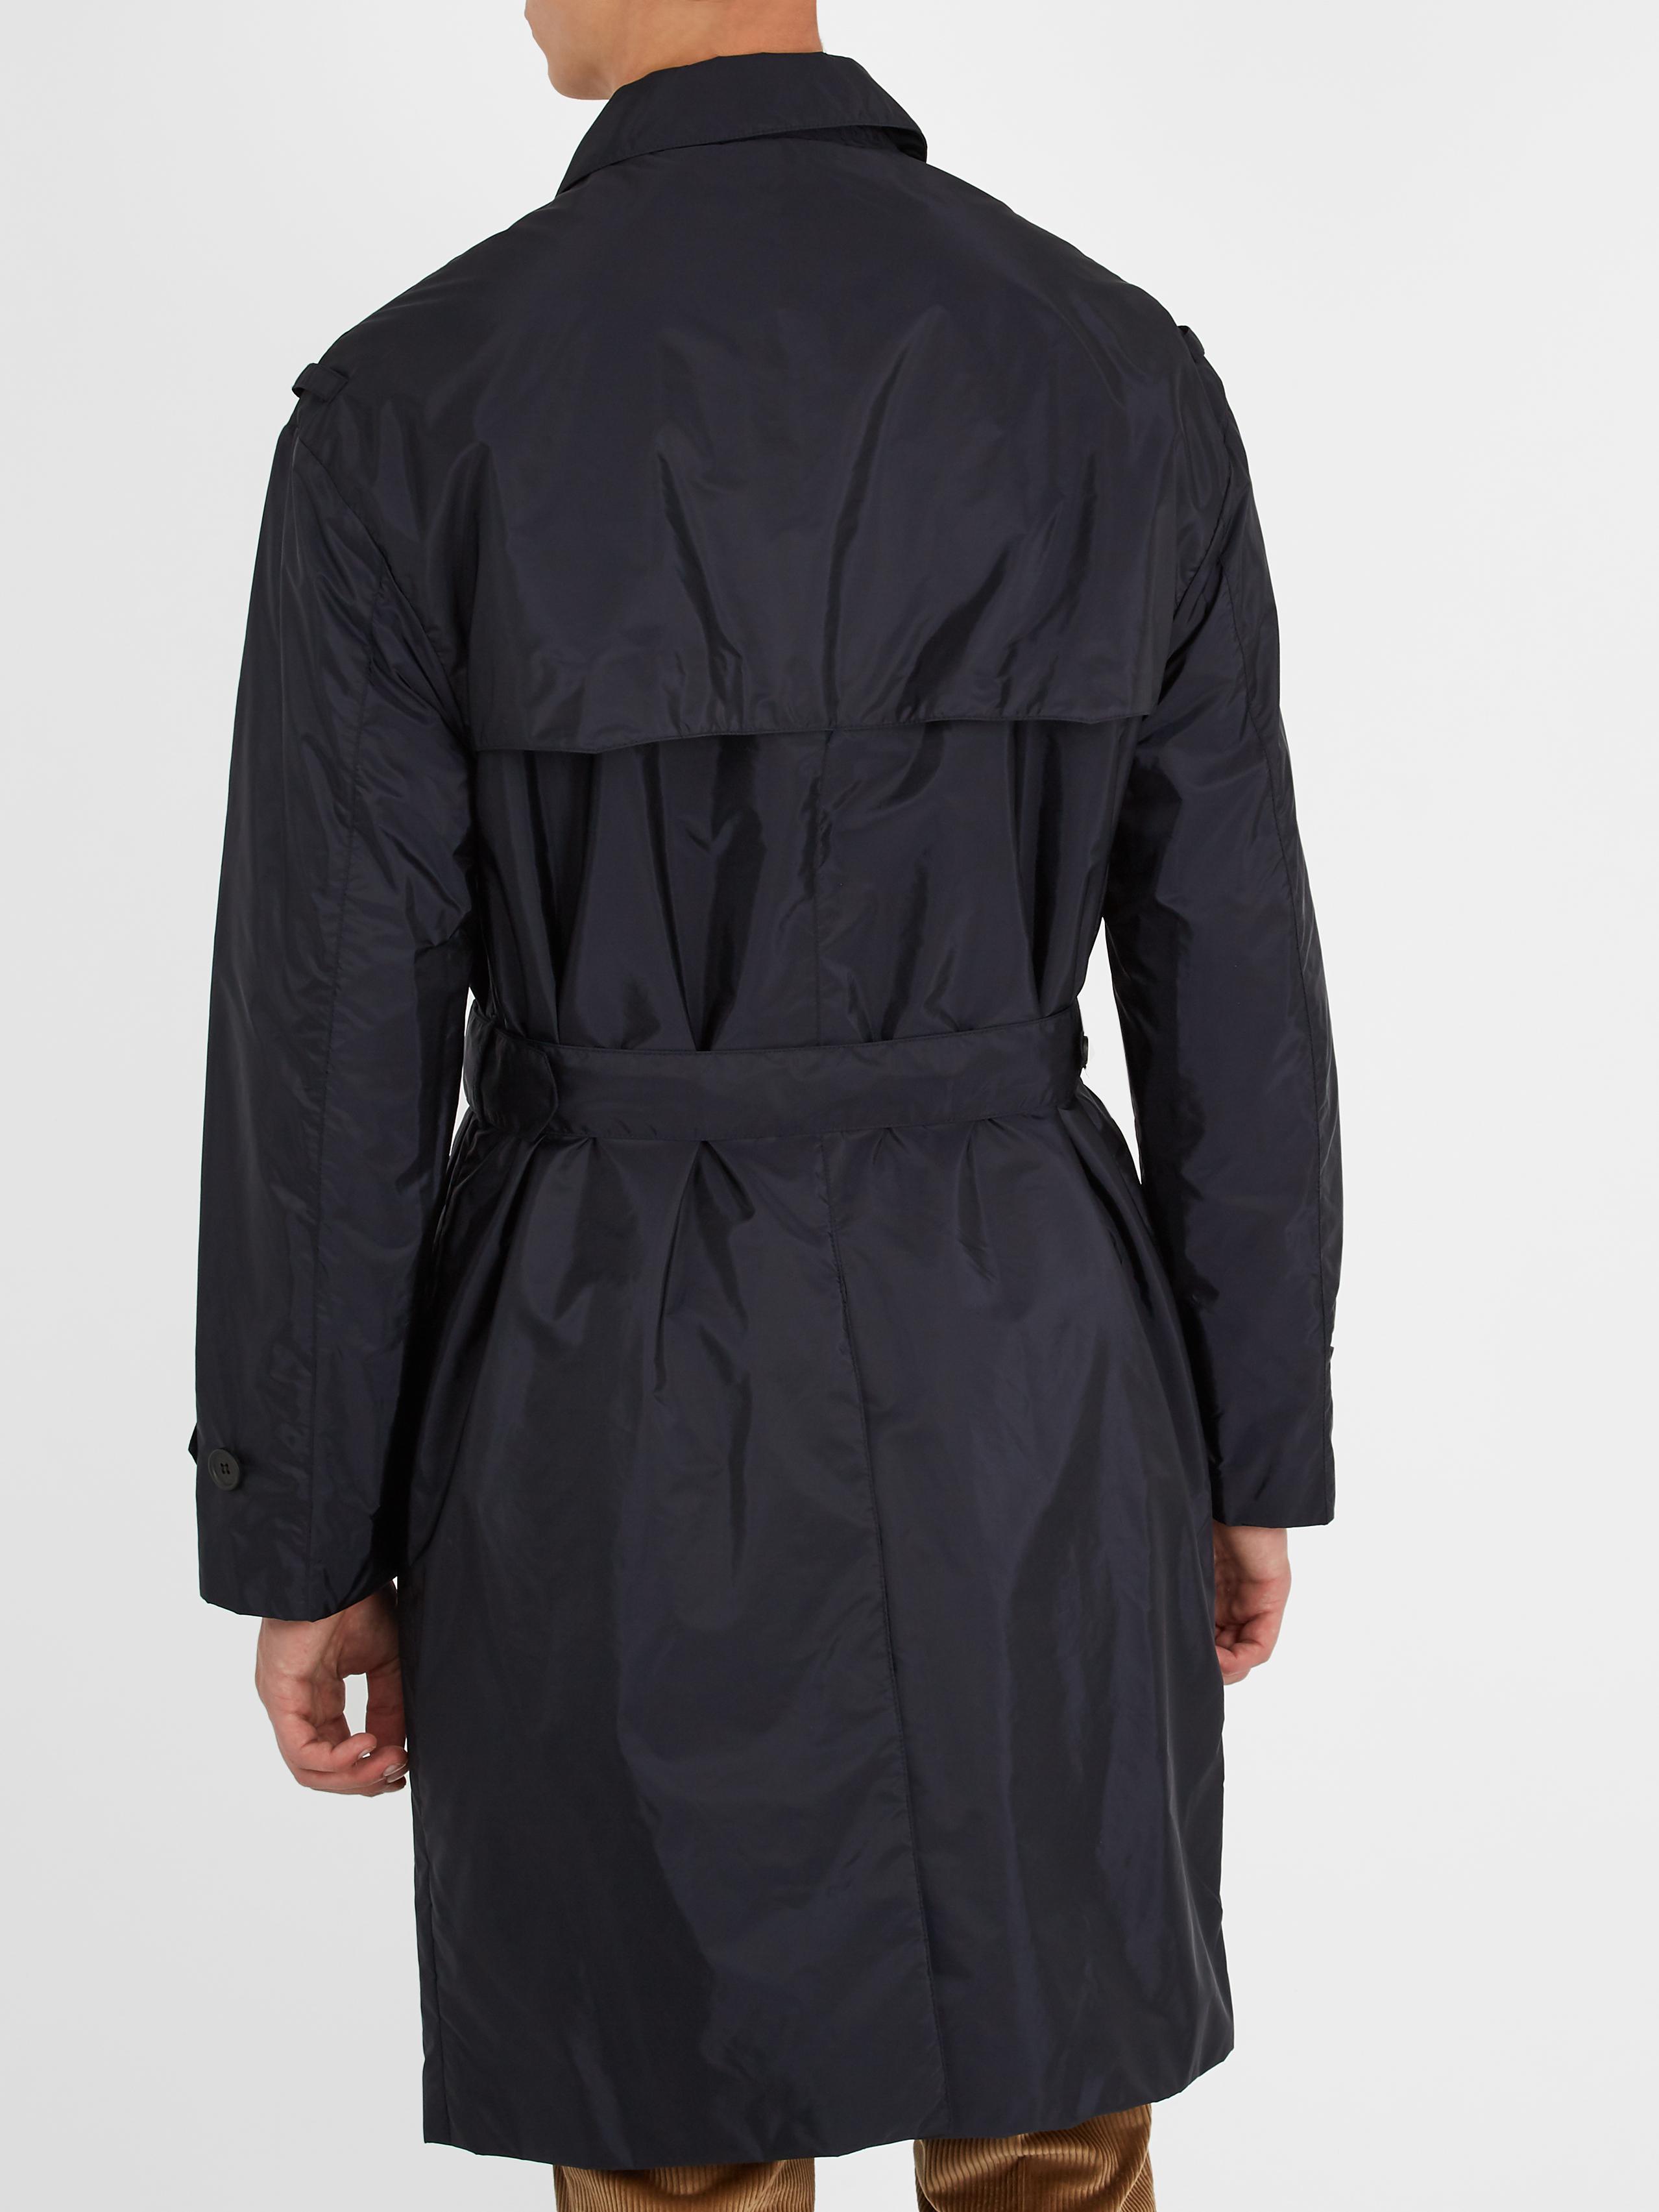 Prada Synthetic Belted Nylon Trench Coat in Navy (Blue) for Men - Lyst